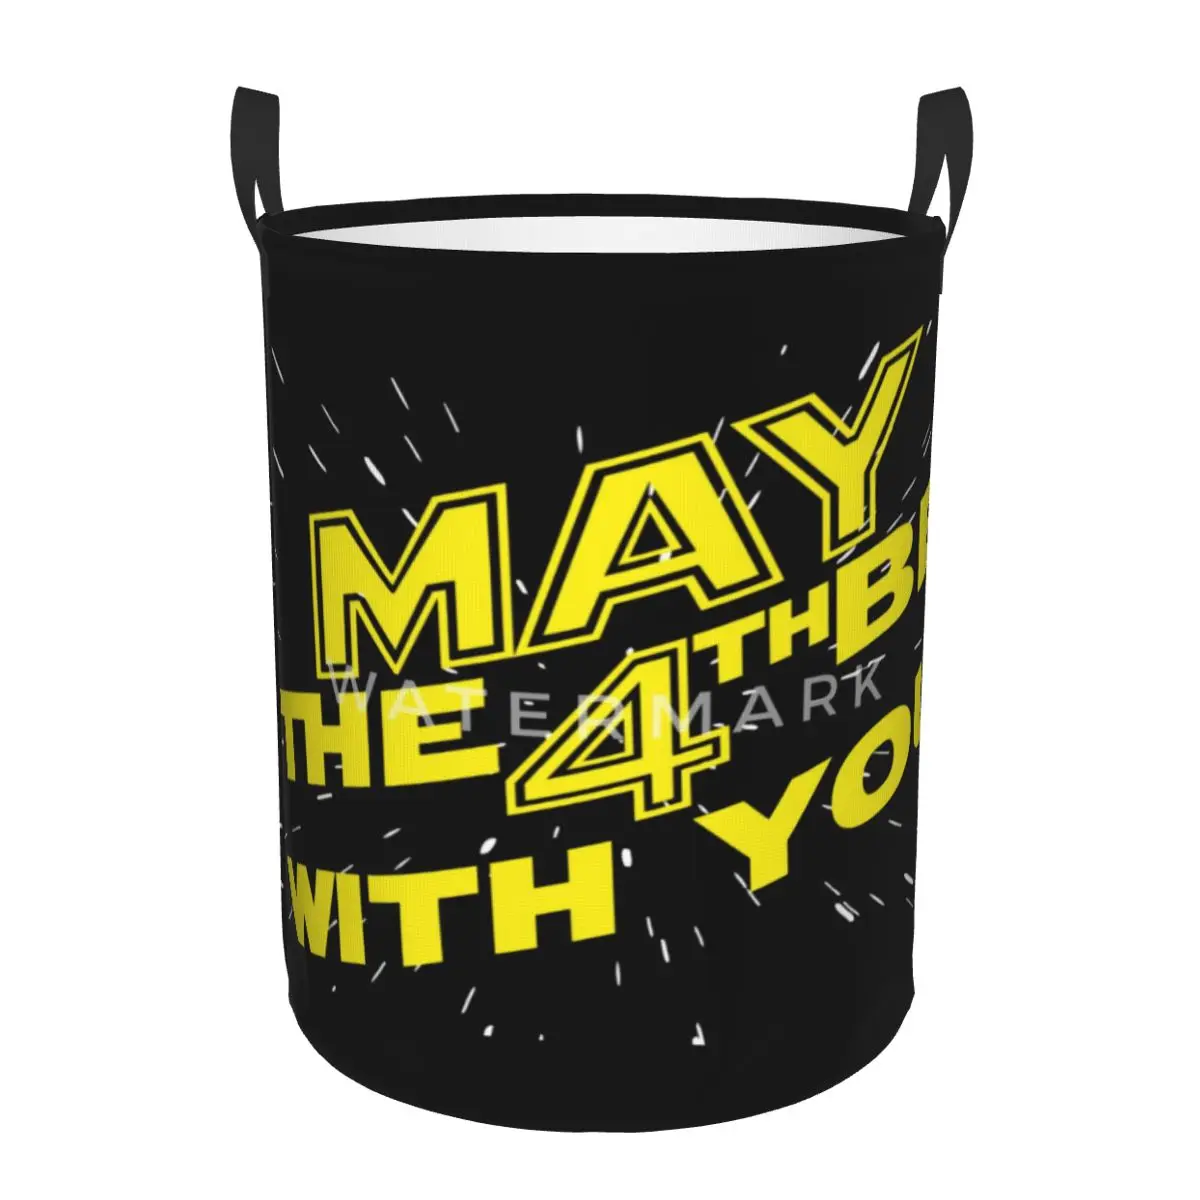 

May The 4th Be With You Circular hamper,Storage Basket Sturdy and durableGreat for kitchens books